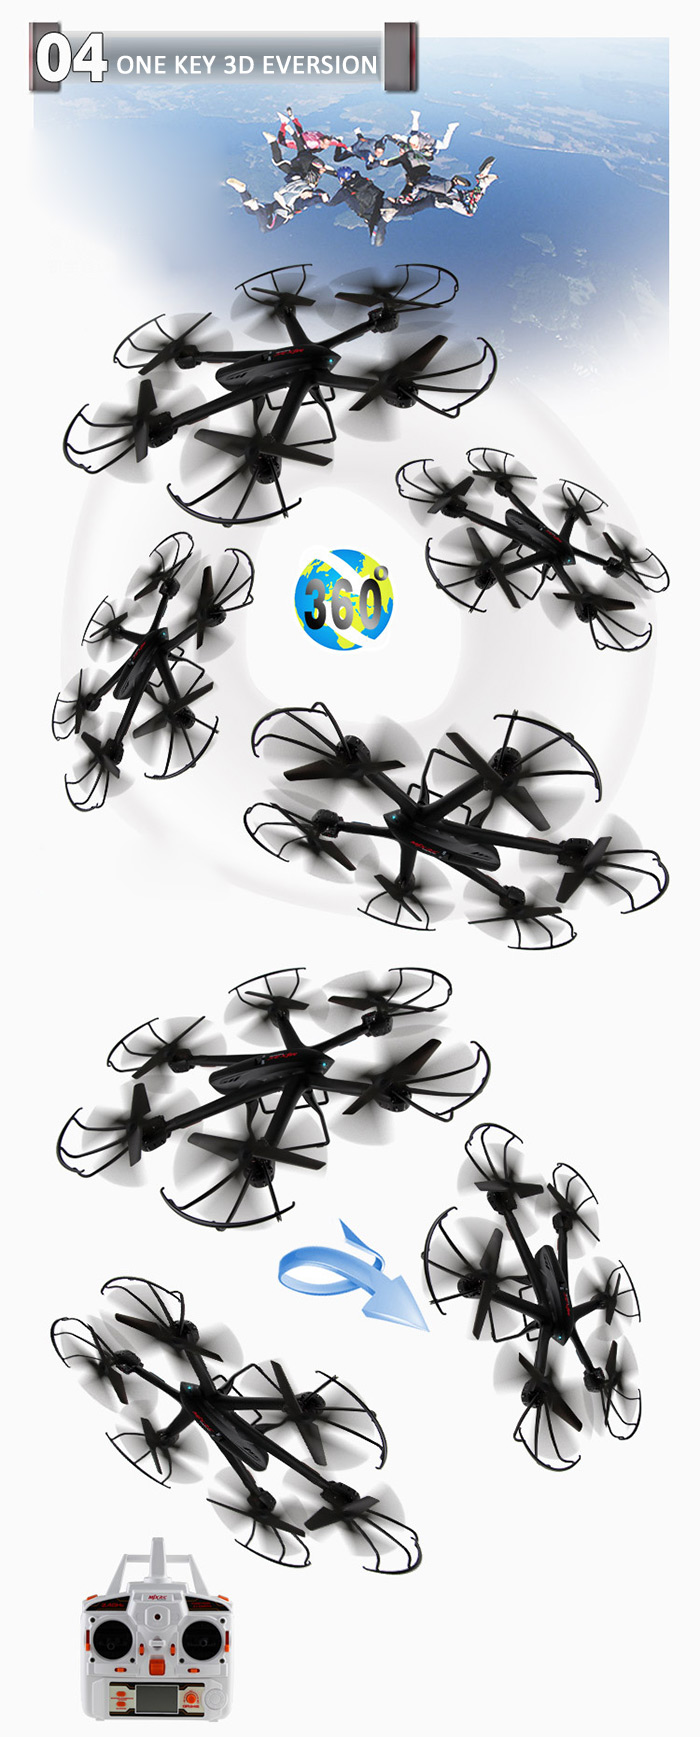 MJX X600 Headless Mode 2.4GHz 6 Axis Gyro RC Hexacopter with 3D Roll Stumbling Function